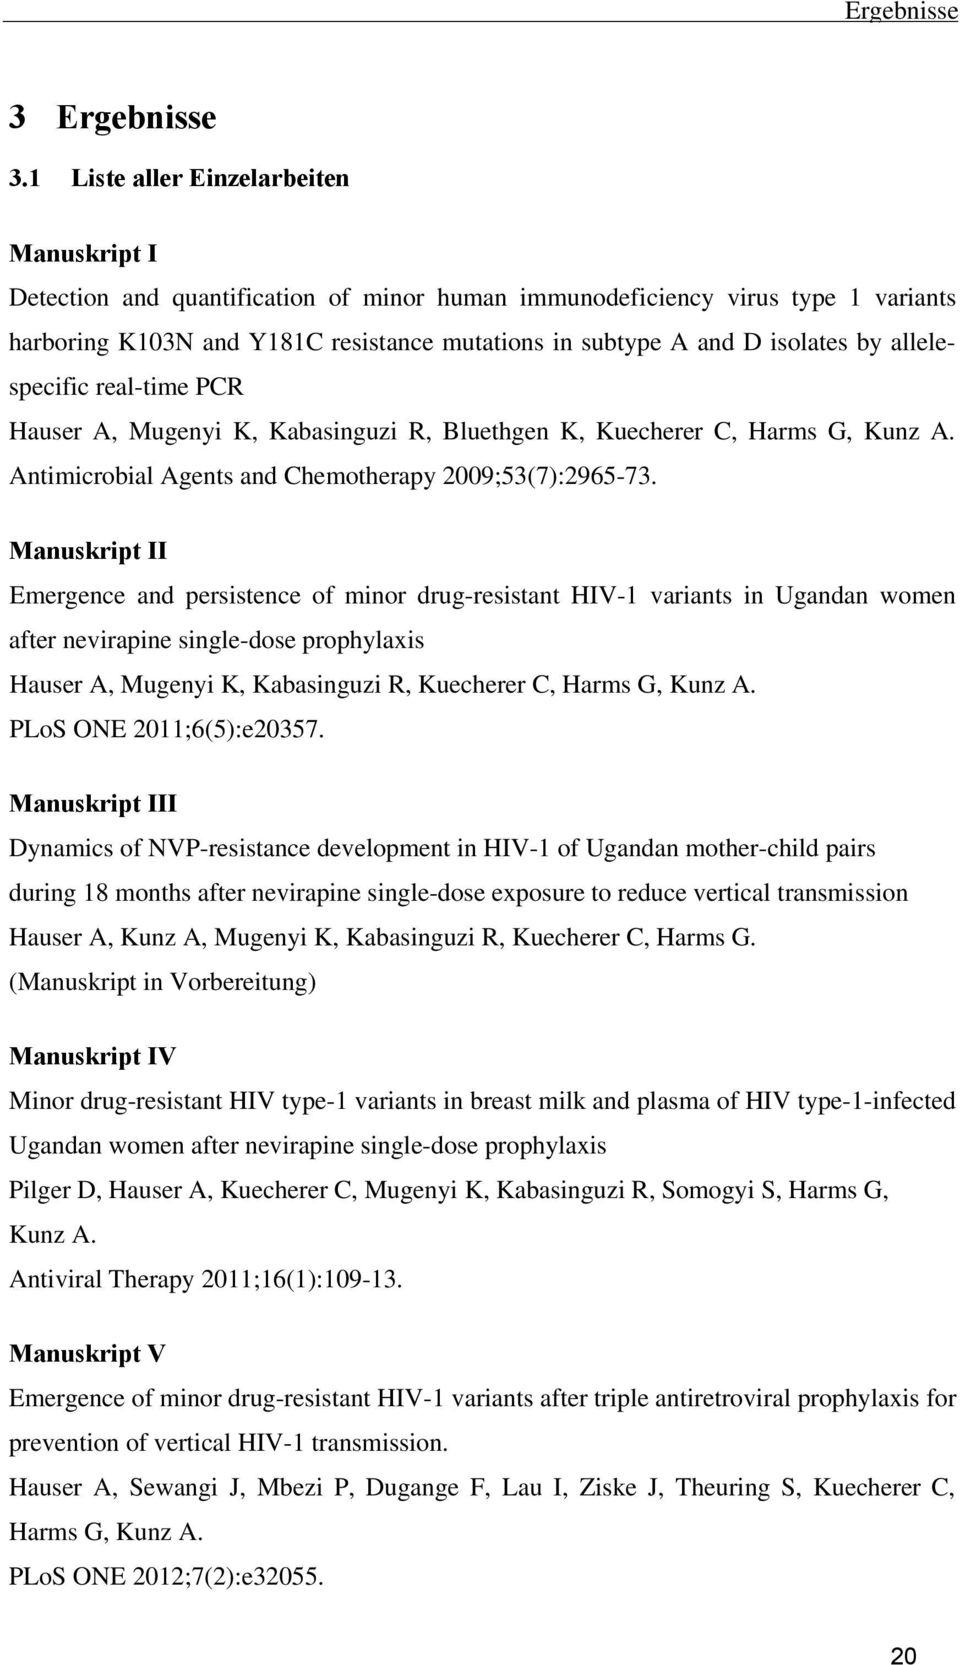 by allelespecific real-time PCR Hauser A, Mugenyi K, Kabasinguzi R, Bluethgen K, Kuecherer C, Harms G, Kunz A. Antimicrobial Agents and Chemotherapy 2009;53(7):2965-73.